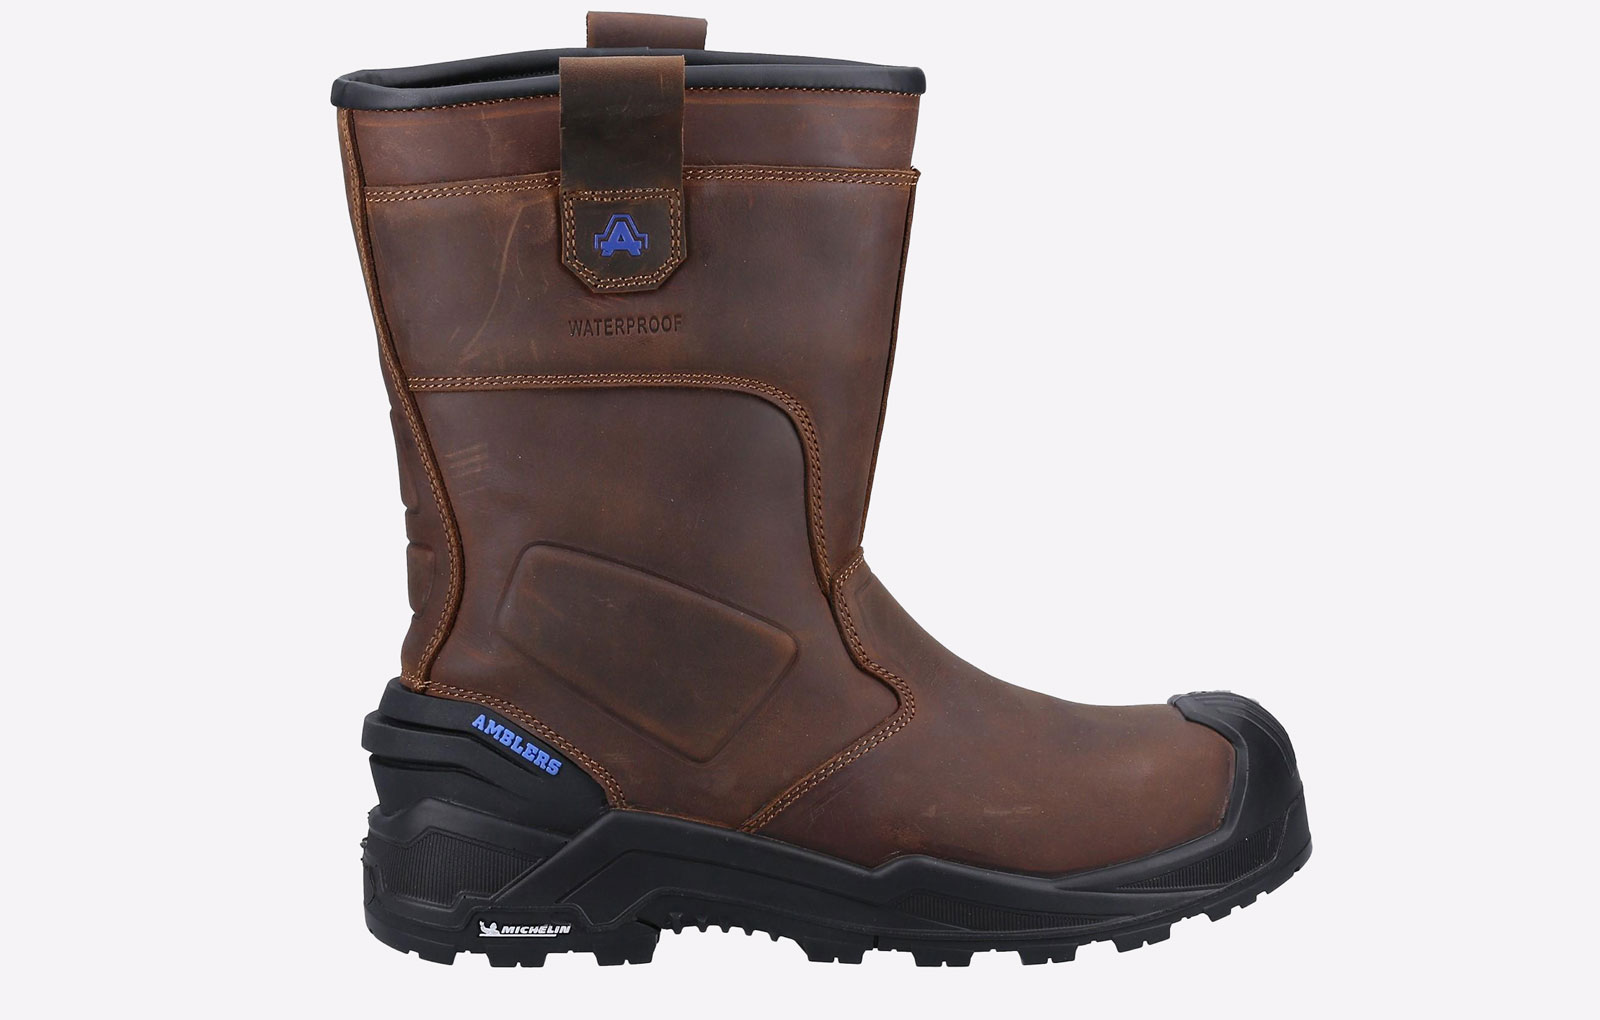 Amblers Conqueror Safety Rigger Boot WATERPROOF Mens - GRD-37412-69766-14